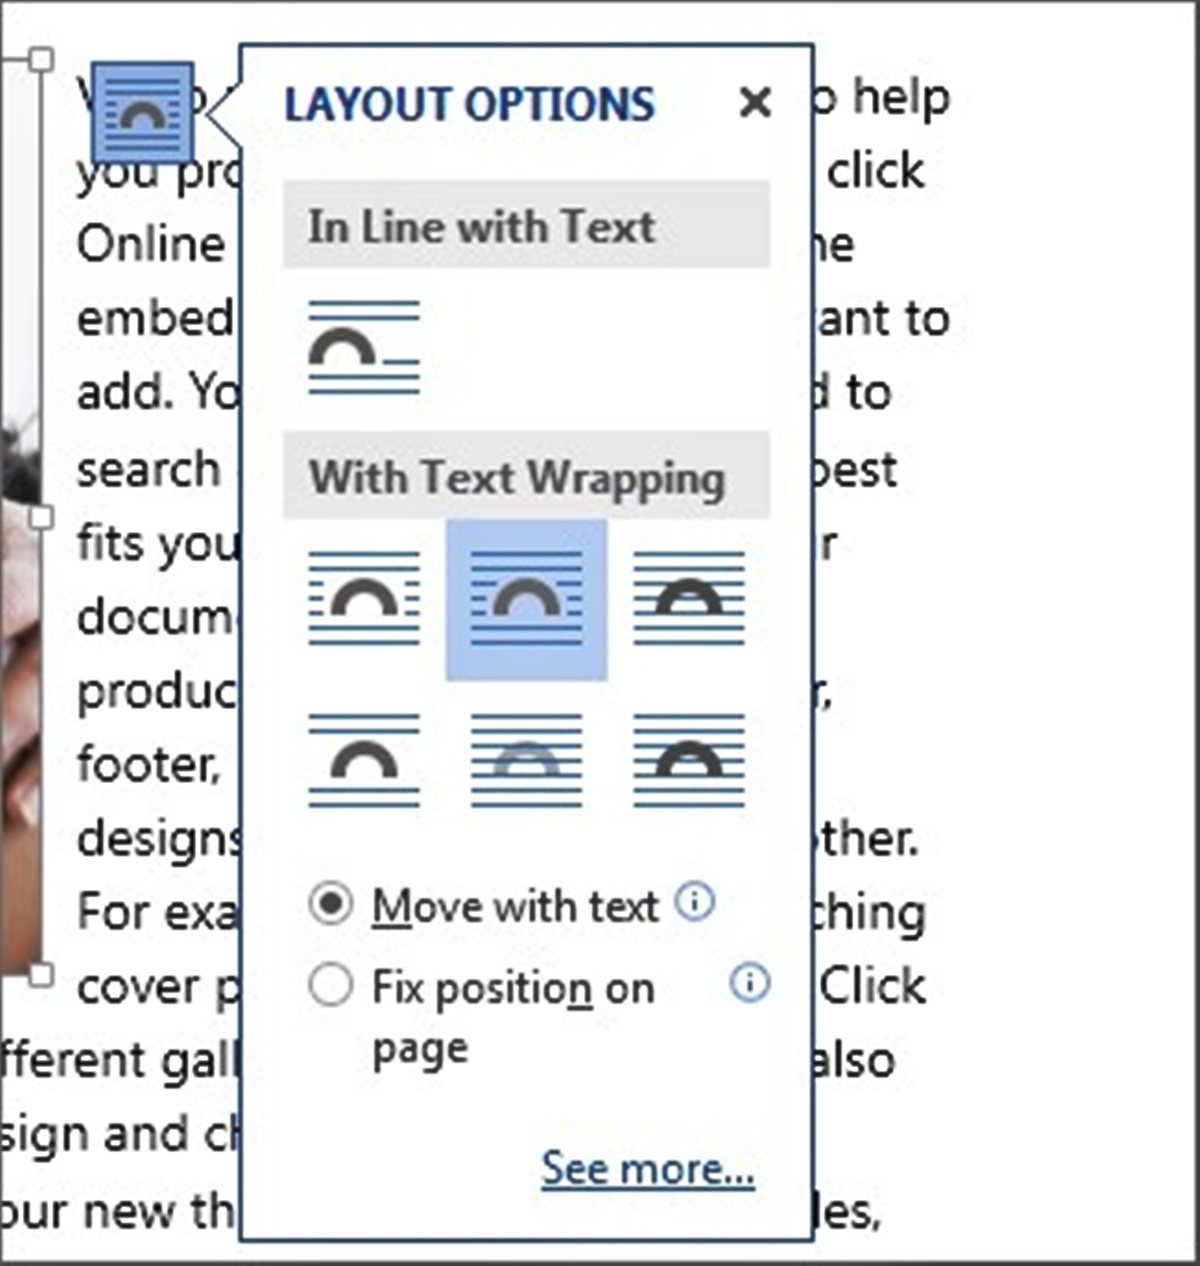 How To Text Wrap In PowerPoint